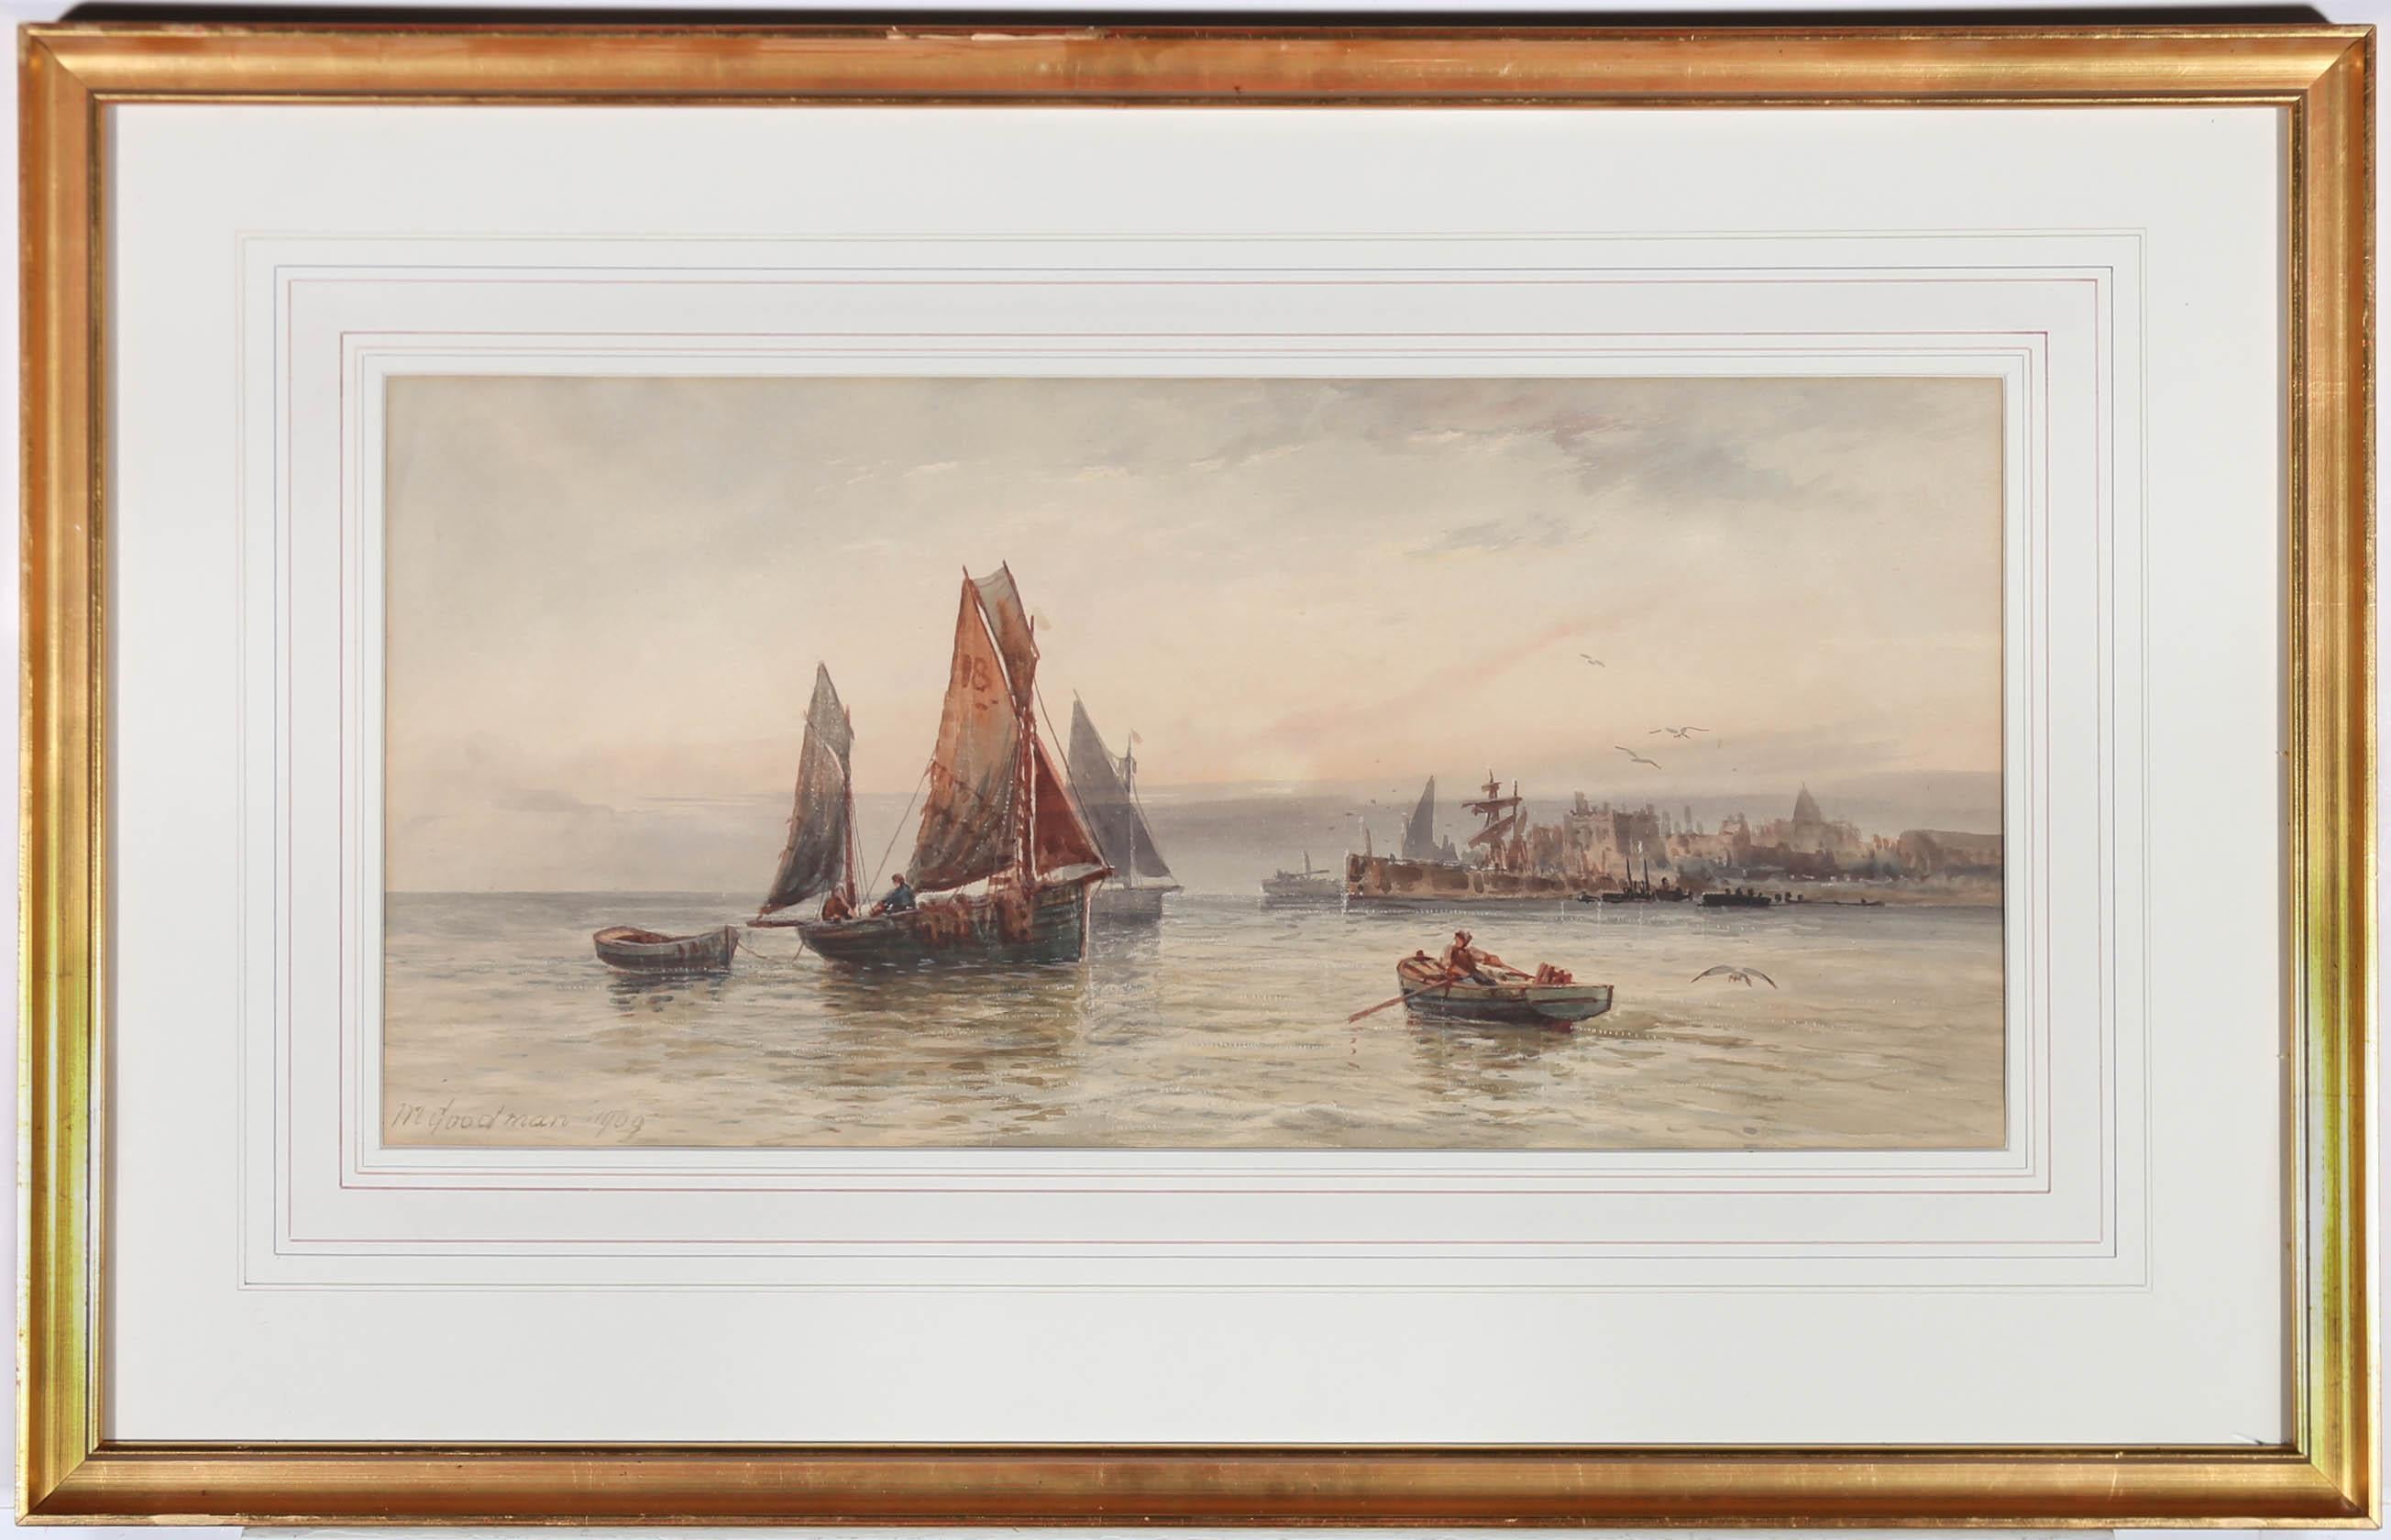 An early 20th century continental themed watercolour depicting two manned sailing boats out in calm waters. Visible in the painting's background a coastal harbour can be seen with a large stone jetty. The watercolour is signed and dated to the lower